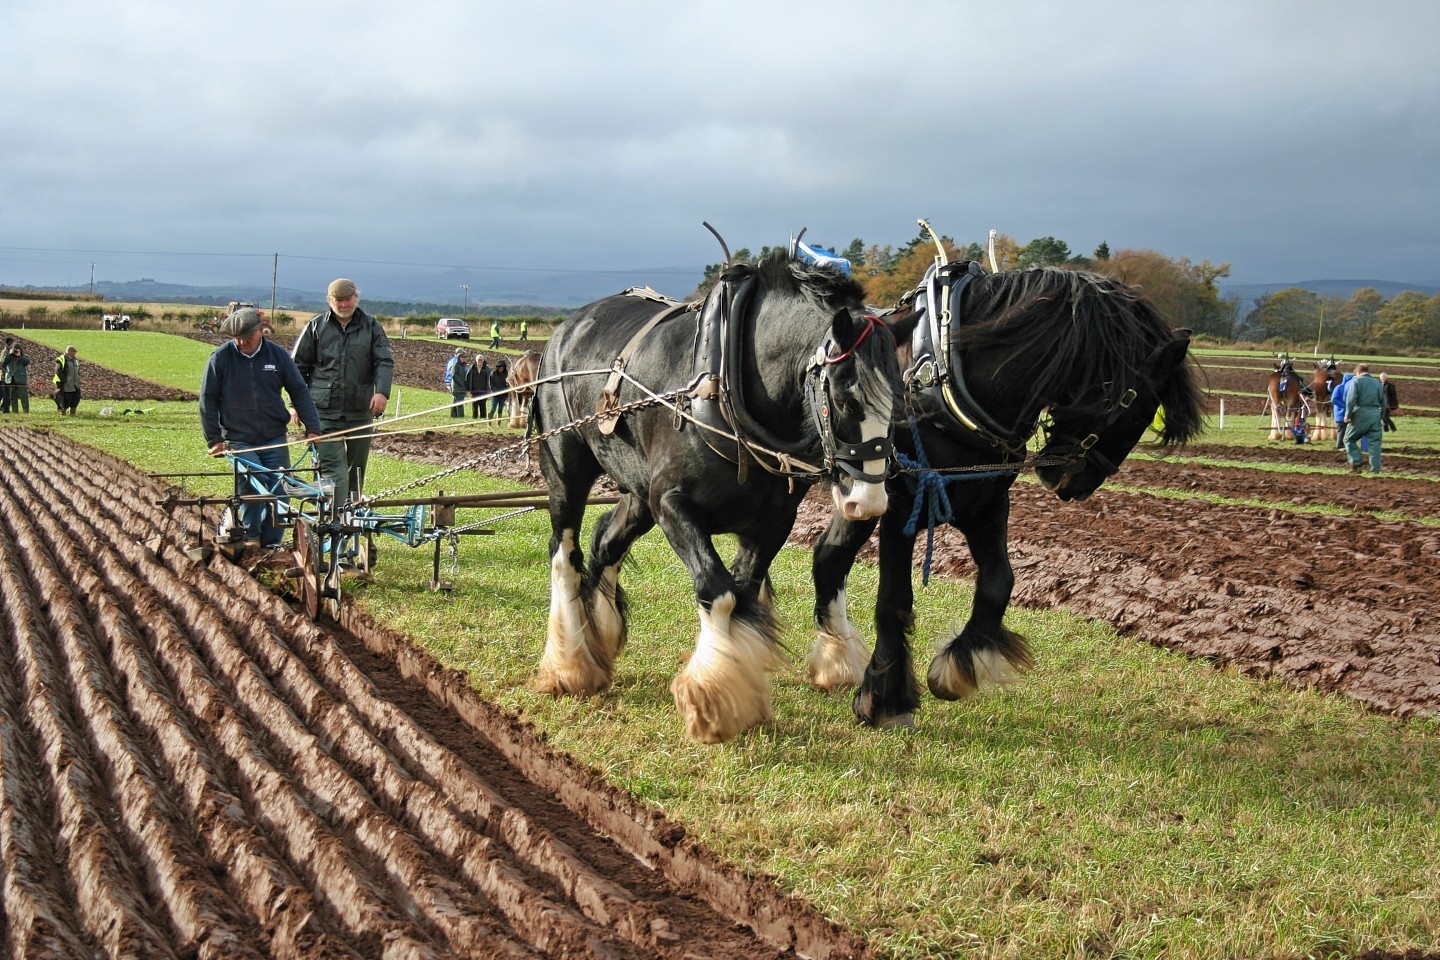 Jim Elliott with a pair of horses ploughing